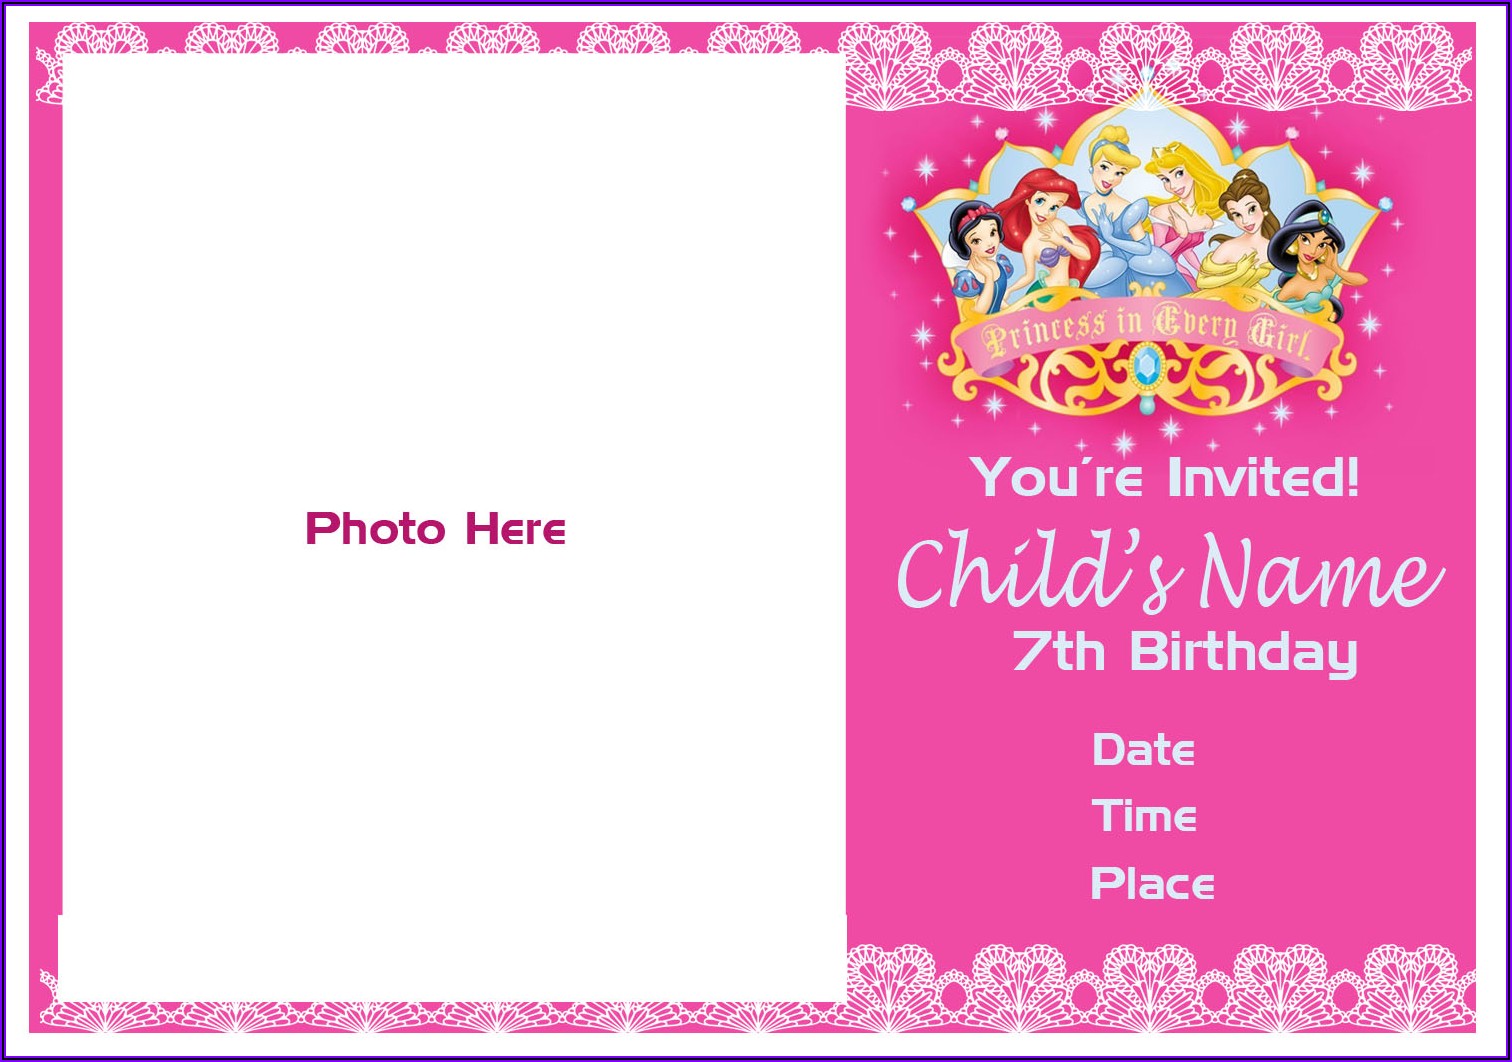 7th Birthday Invitation Message For Girl